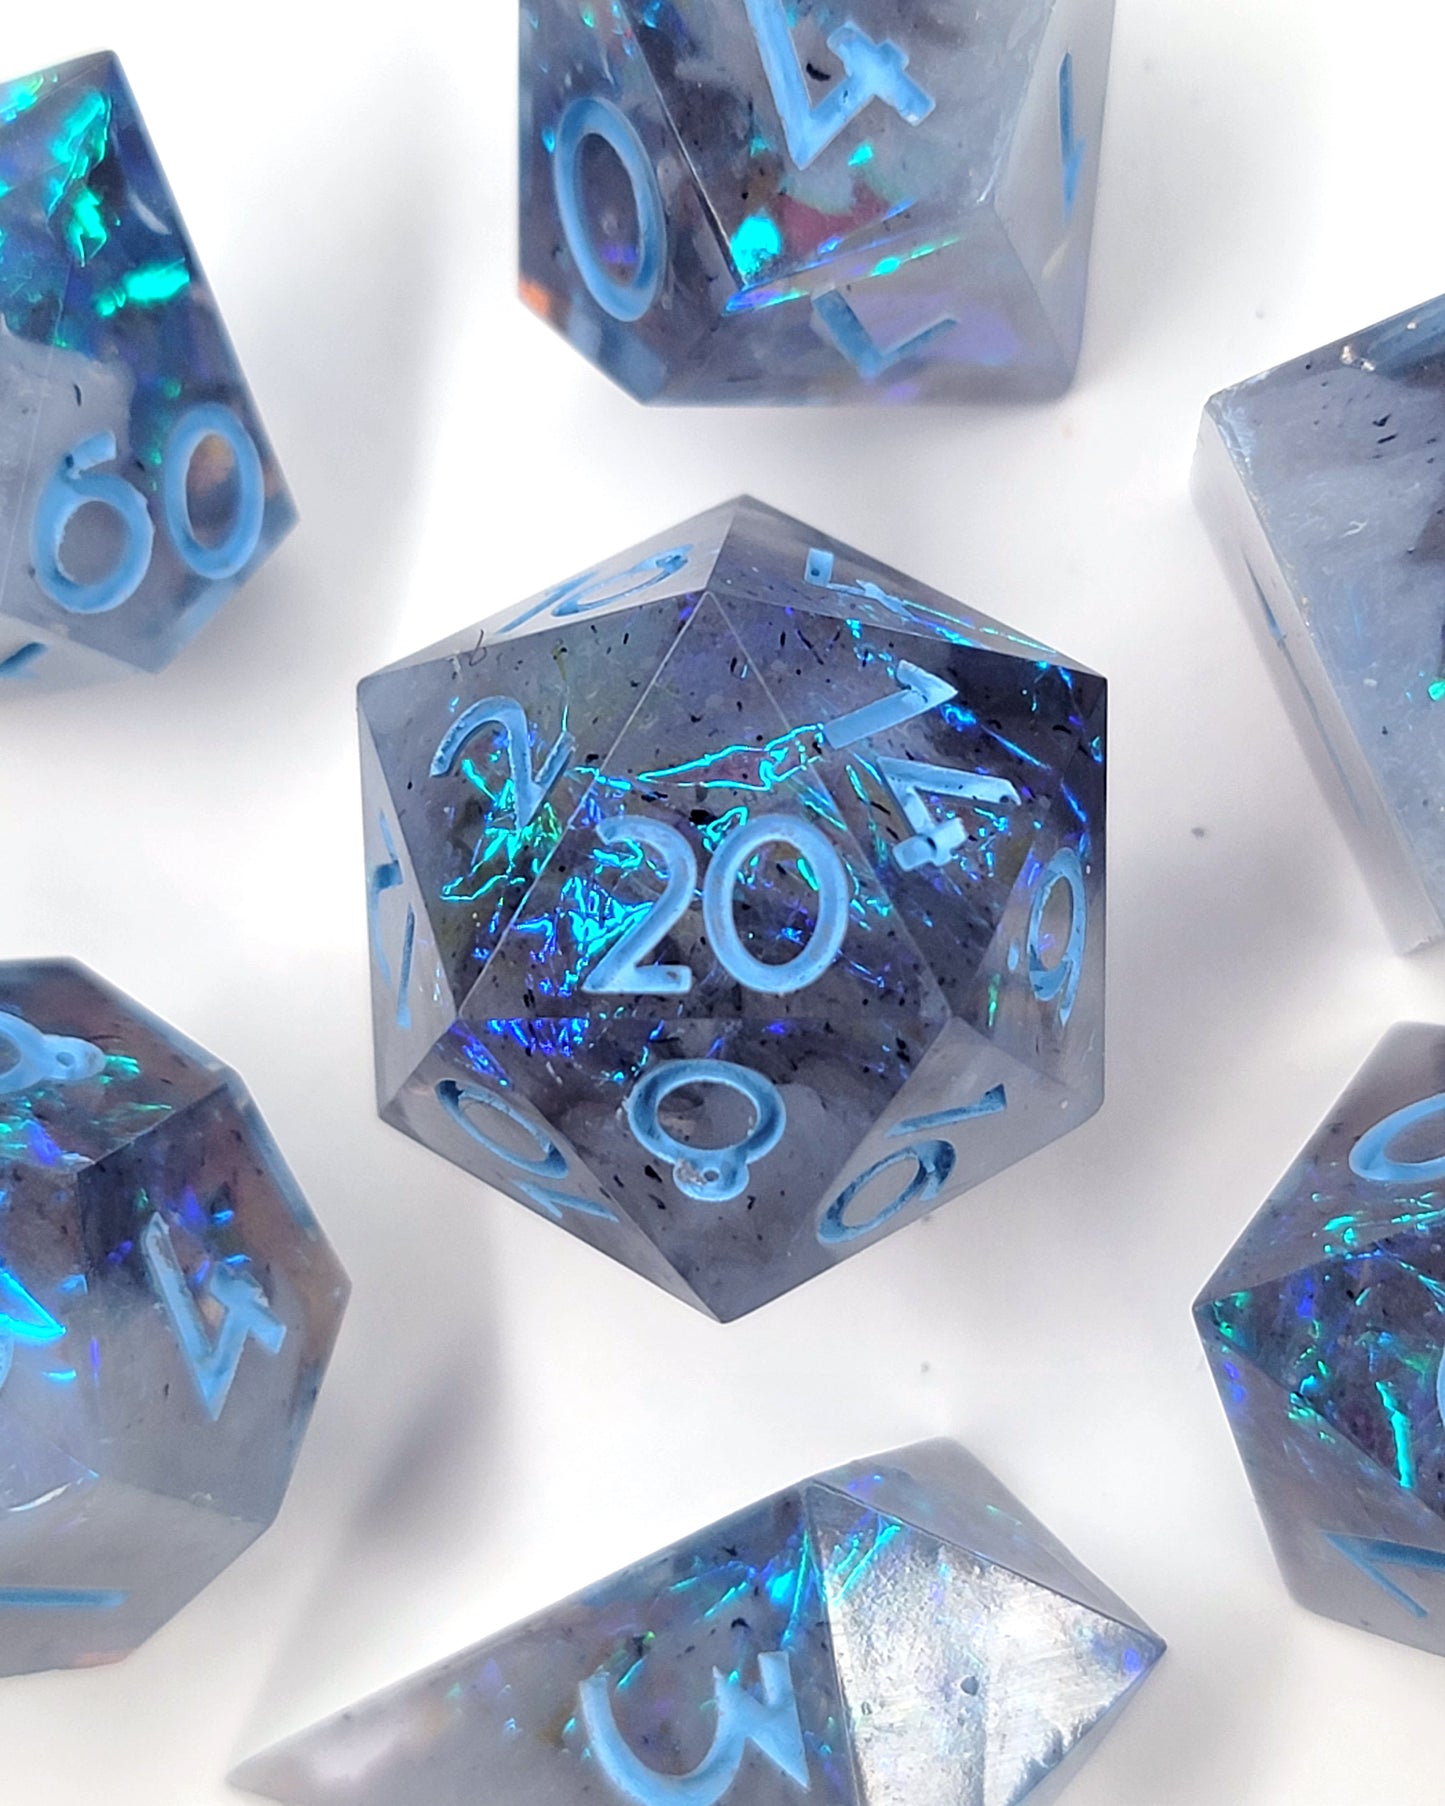 Lighting Storm - 7 Piece handmade D&D Dice| Hand Crafted Dungeons and Dragons Dice